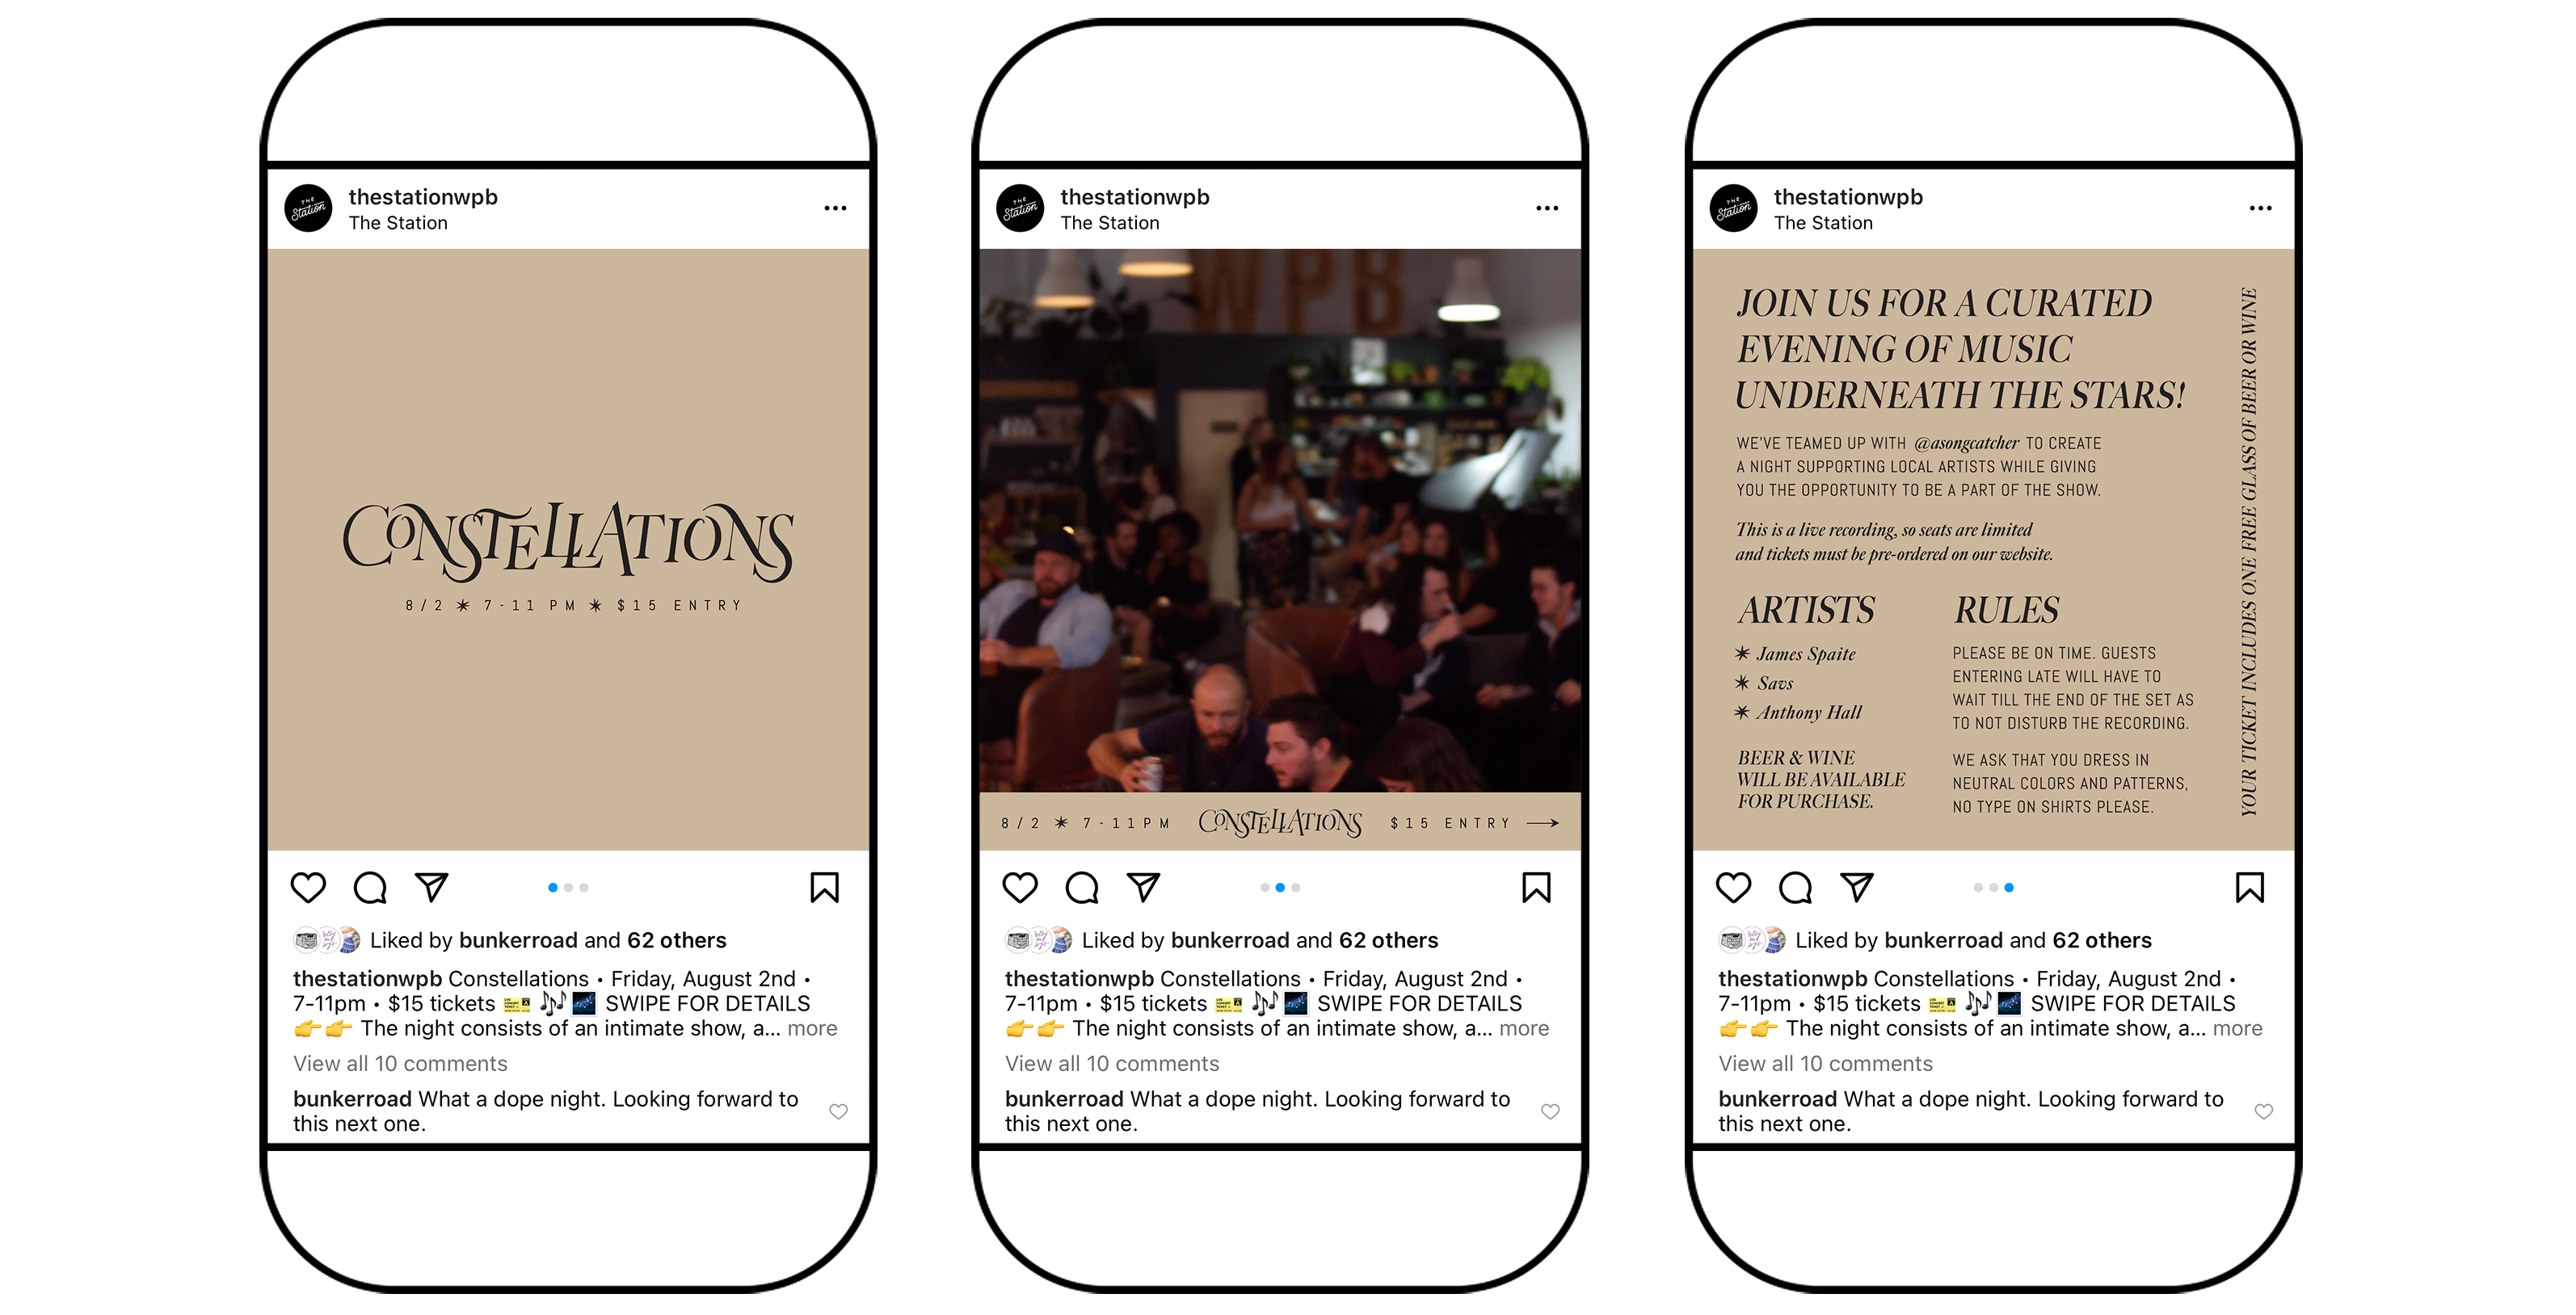 Instagram graphics for Elizabeth Ave Station's Constellations music event. It showcases Constellations logo in black against a light brown background, with additional slides including details for the event and imagery of the space.